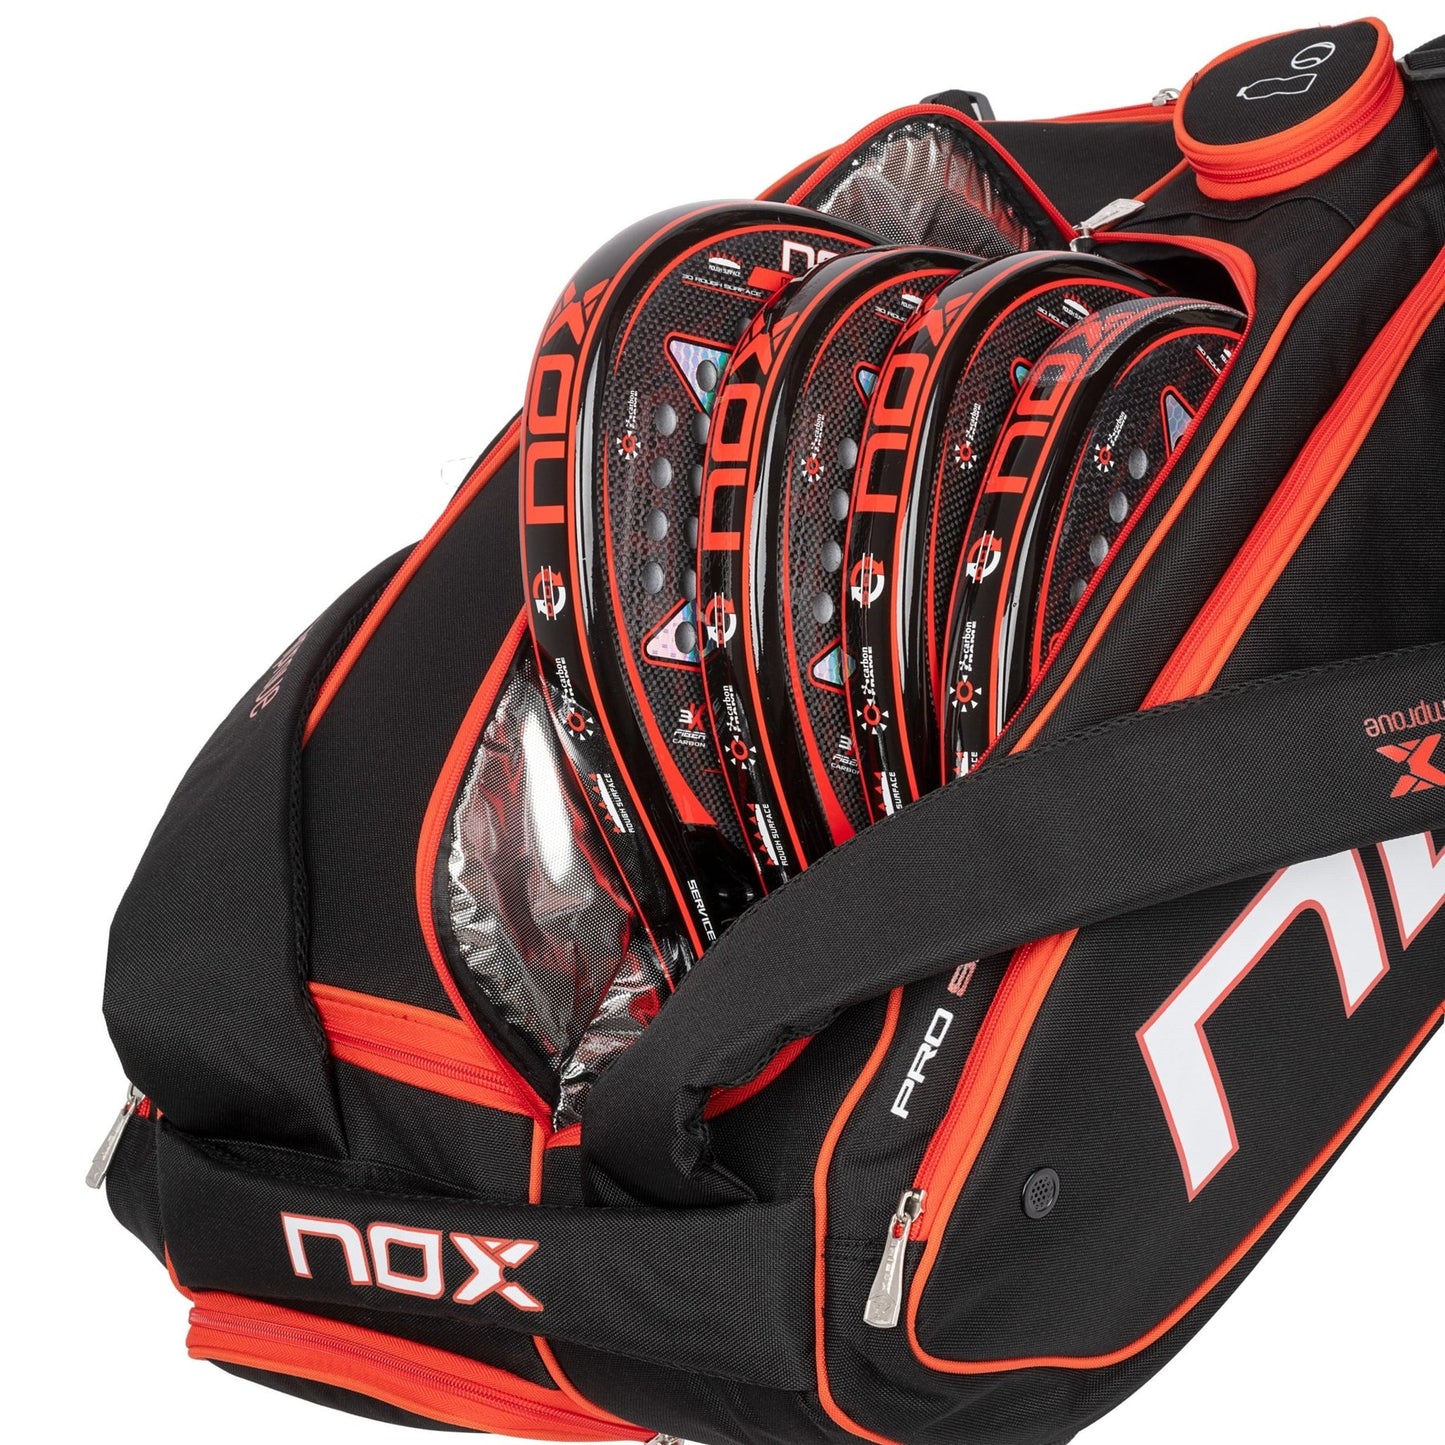 AT10 XXL Competition racket bag by Agustín Tapia